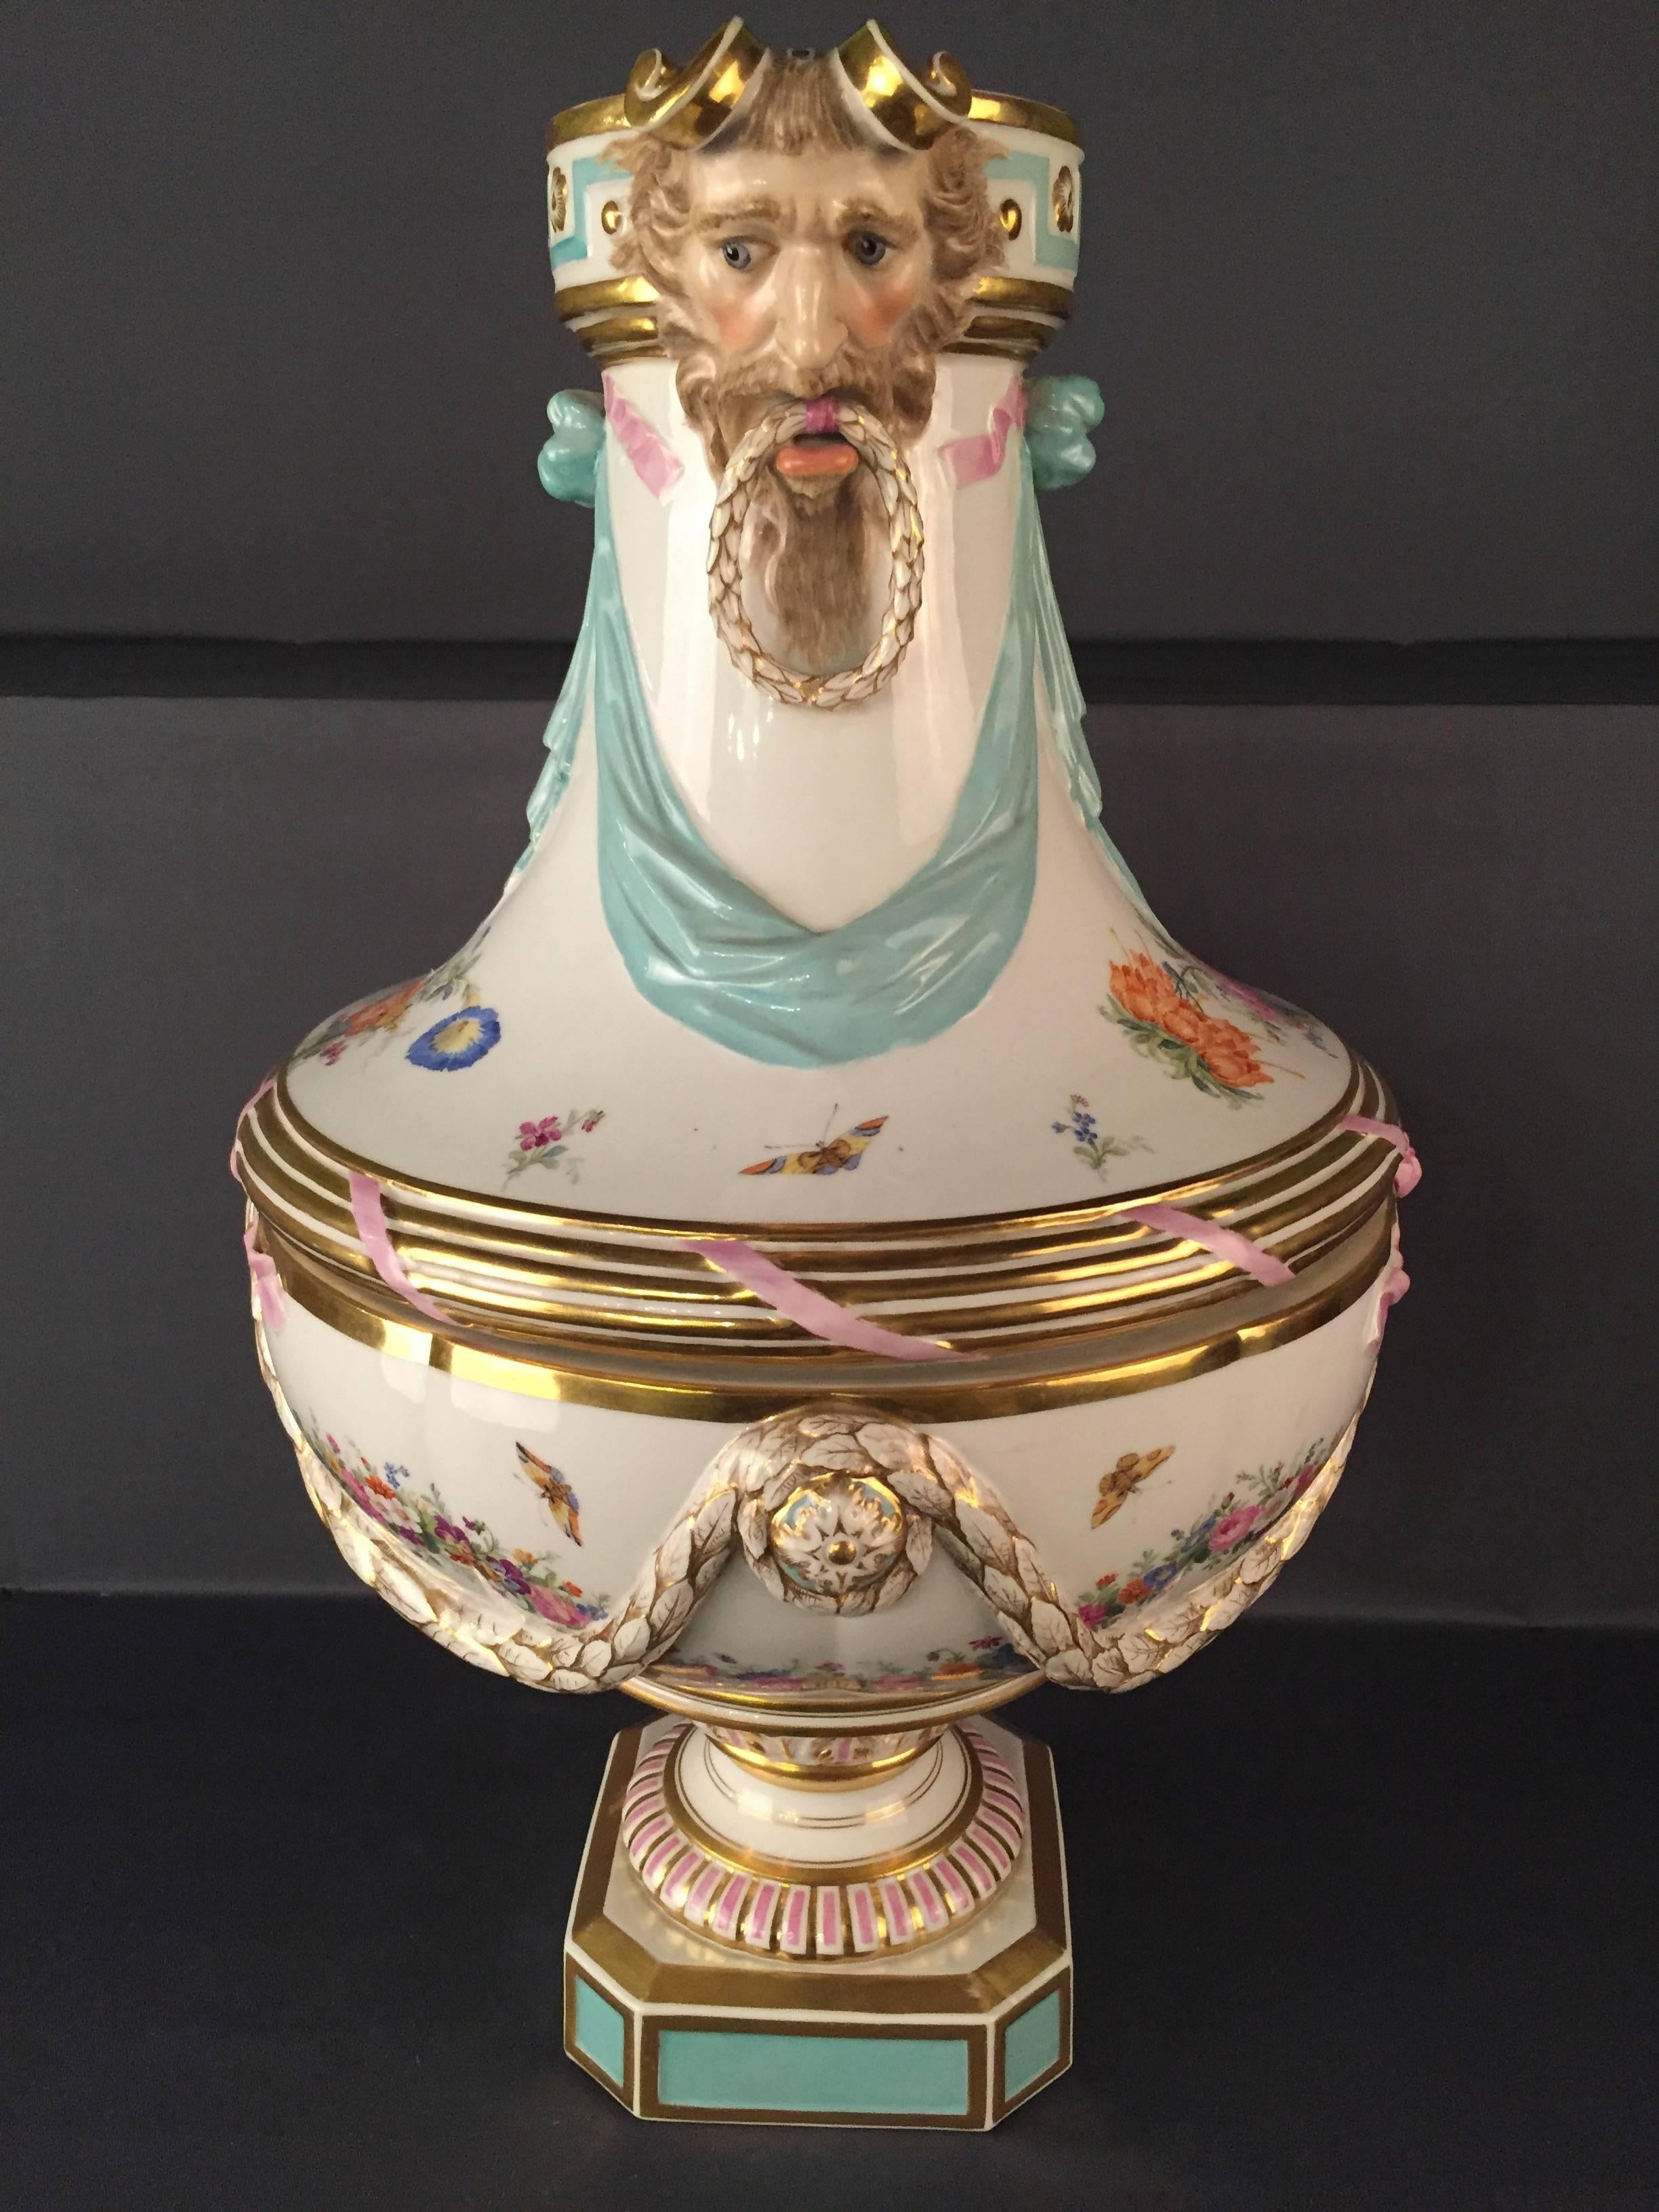 Vase with satyr heads. Urn shape with cloth draped on octagonal plinth.
Colorful painted flower garlands, bouquets, streublums and butterflies.
The satyr heads painted in color.
Pink, light green and gold stained. Gold edges.
Blue scepter brand.